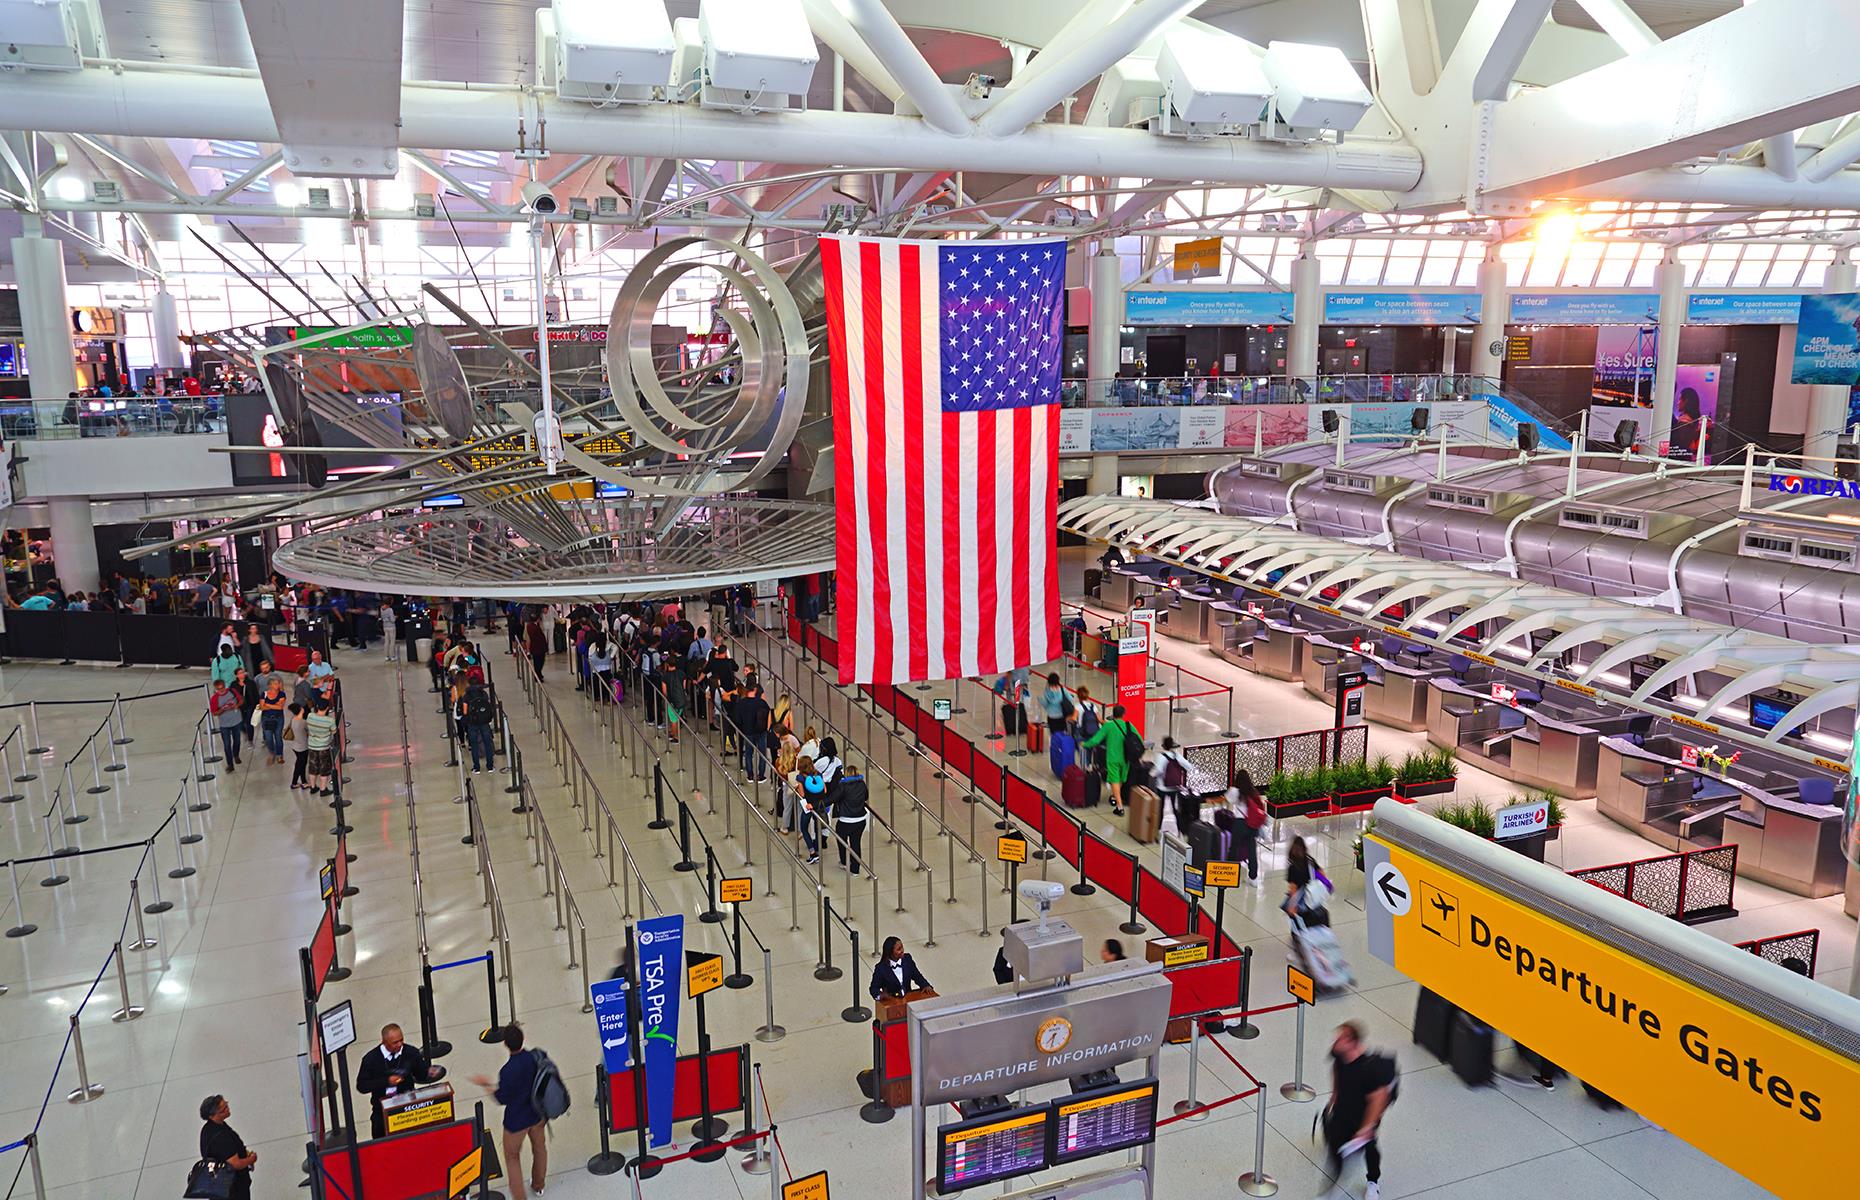 <p>The busiest of New York's international airports, and one of the busiest in the USA, JFK flew passengers to 74 countries in January 2020, with more than <a href="https://jfkairport.net/statistics/">34,000 flights that month</a>. It's come a long way in the customer satisfaction stakes too, jumping six places in the JD Power index 2020 with a score of 793. Travelers appreciate the wide choice of food and shopping options in this huge airport.</p>  <p><a href="https://www.loveexploring.com/guides/78385/new-york-things-to-do"><strong>Here's what to see and do in New York City</strong></a></p>